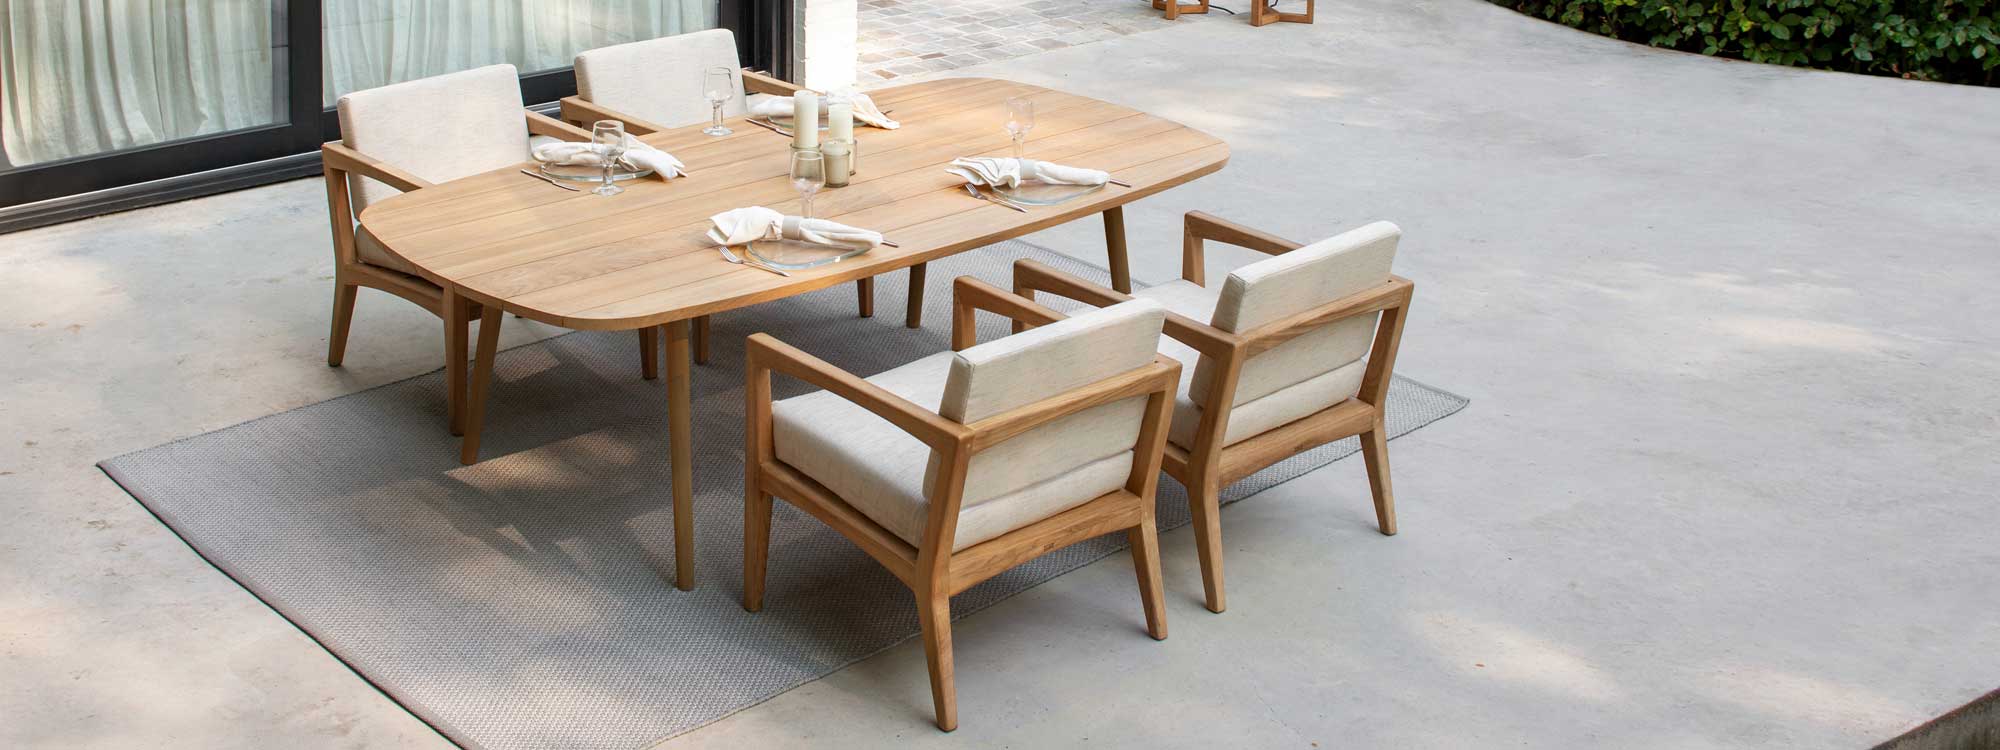 Zenhit low outdoor dining chair shown with Styletto low dining table is a versatile teak garden chair & comfy exterior lounge chair by Royal Botania modern teak furniture.